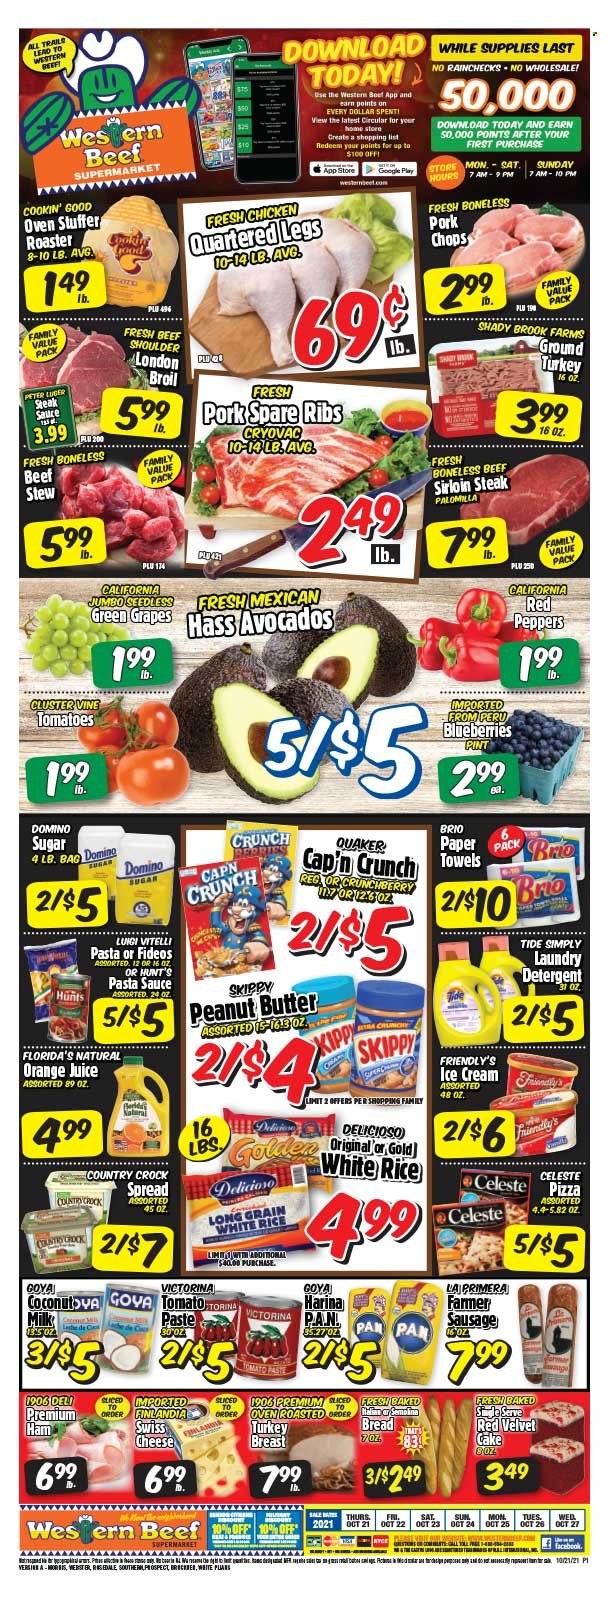 thumbnail - Western Beef Flyer - 10/21/2021 - 10/27/2021 - Sales products - bread, cake, peppers, red peppers, blueberries, grapes, ground turkey, beef meat, beef sirloin, steak, sirloin steak, pork chops, pork meat, pork ribs, pork spare ribs, pizza, pasta sauce, sauce, Quaker, ham, swiss cheese, ice cream, Friendly's Ice Cream, Celeste, Florida's Natural, sugar, Goya, Cap'n Crunch, rice, white rice, steak sauce, peanut butter, orange juice, juice, detergent, Tide, laundry detergent. Page 1.